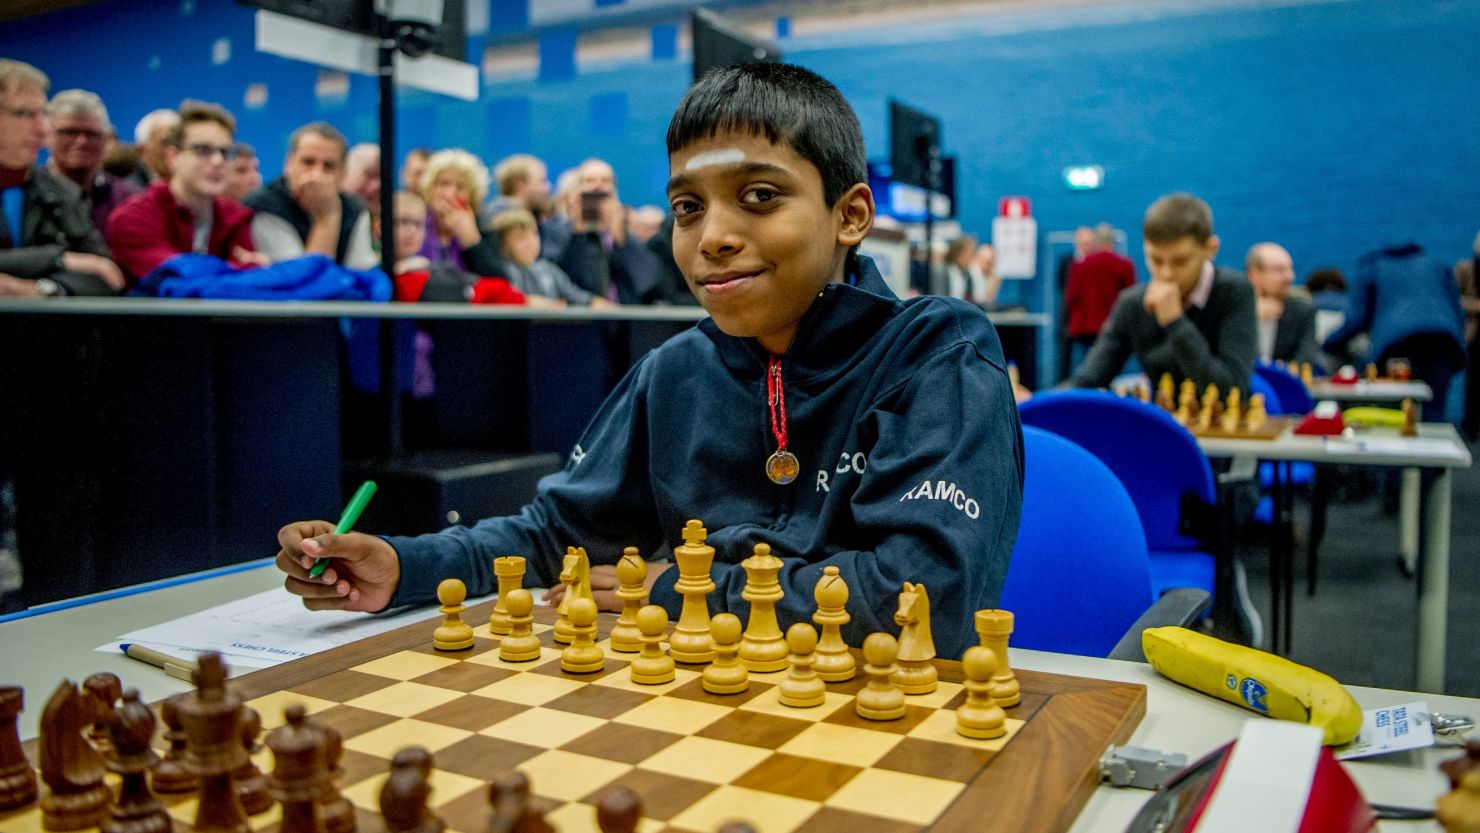 Chess Results - Full Tournament Coverage 